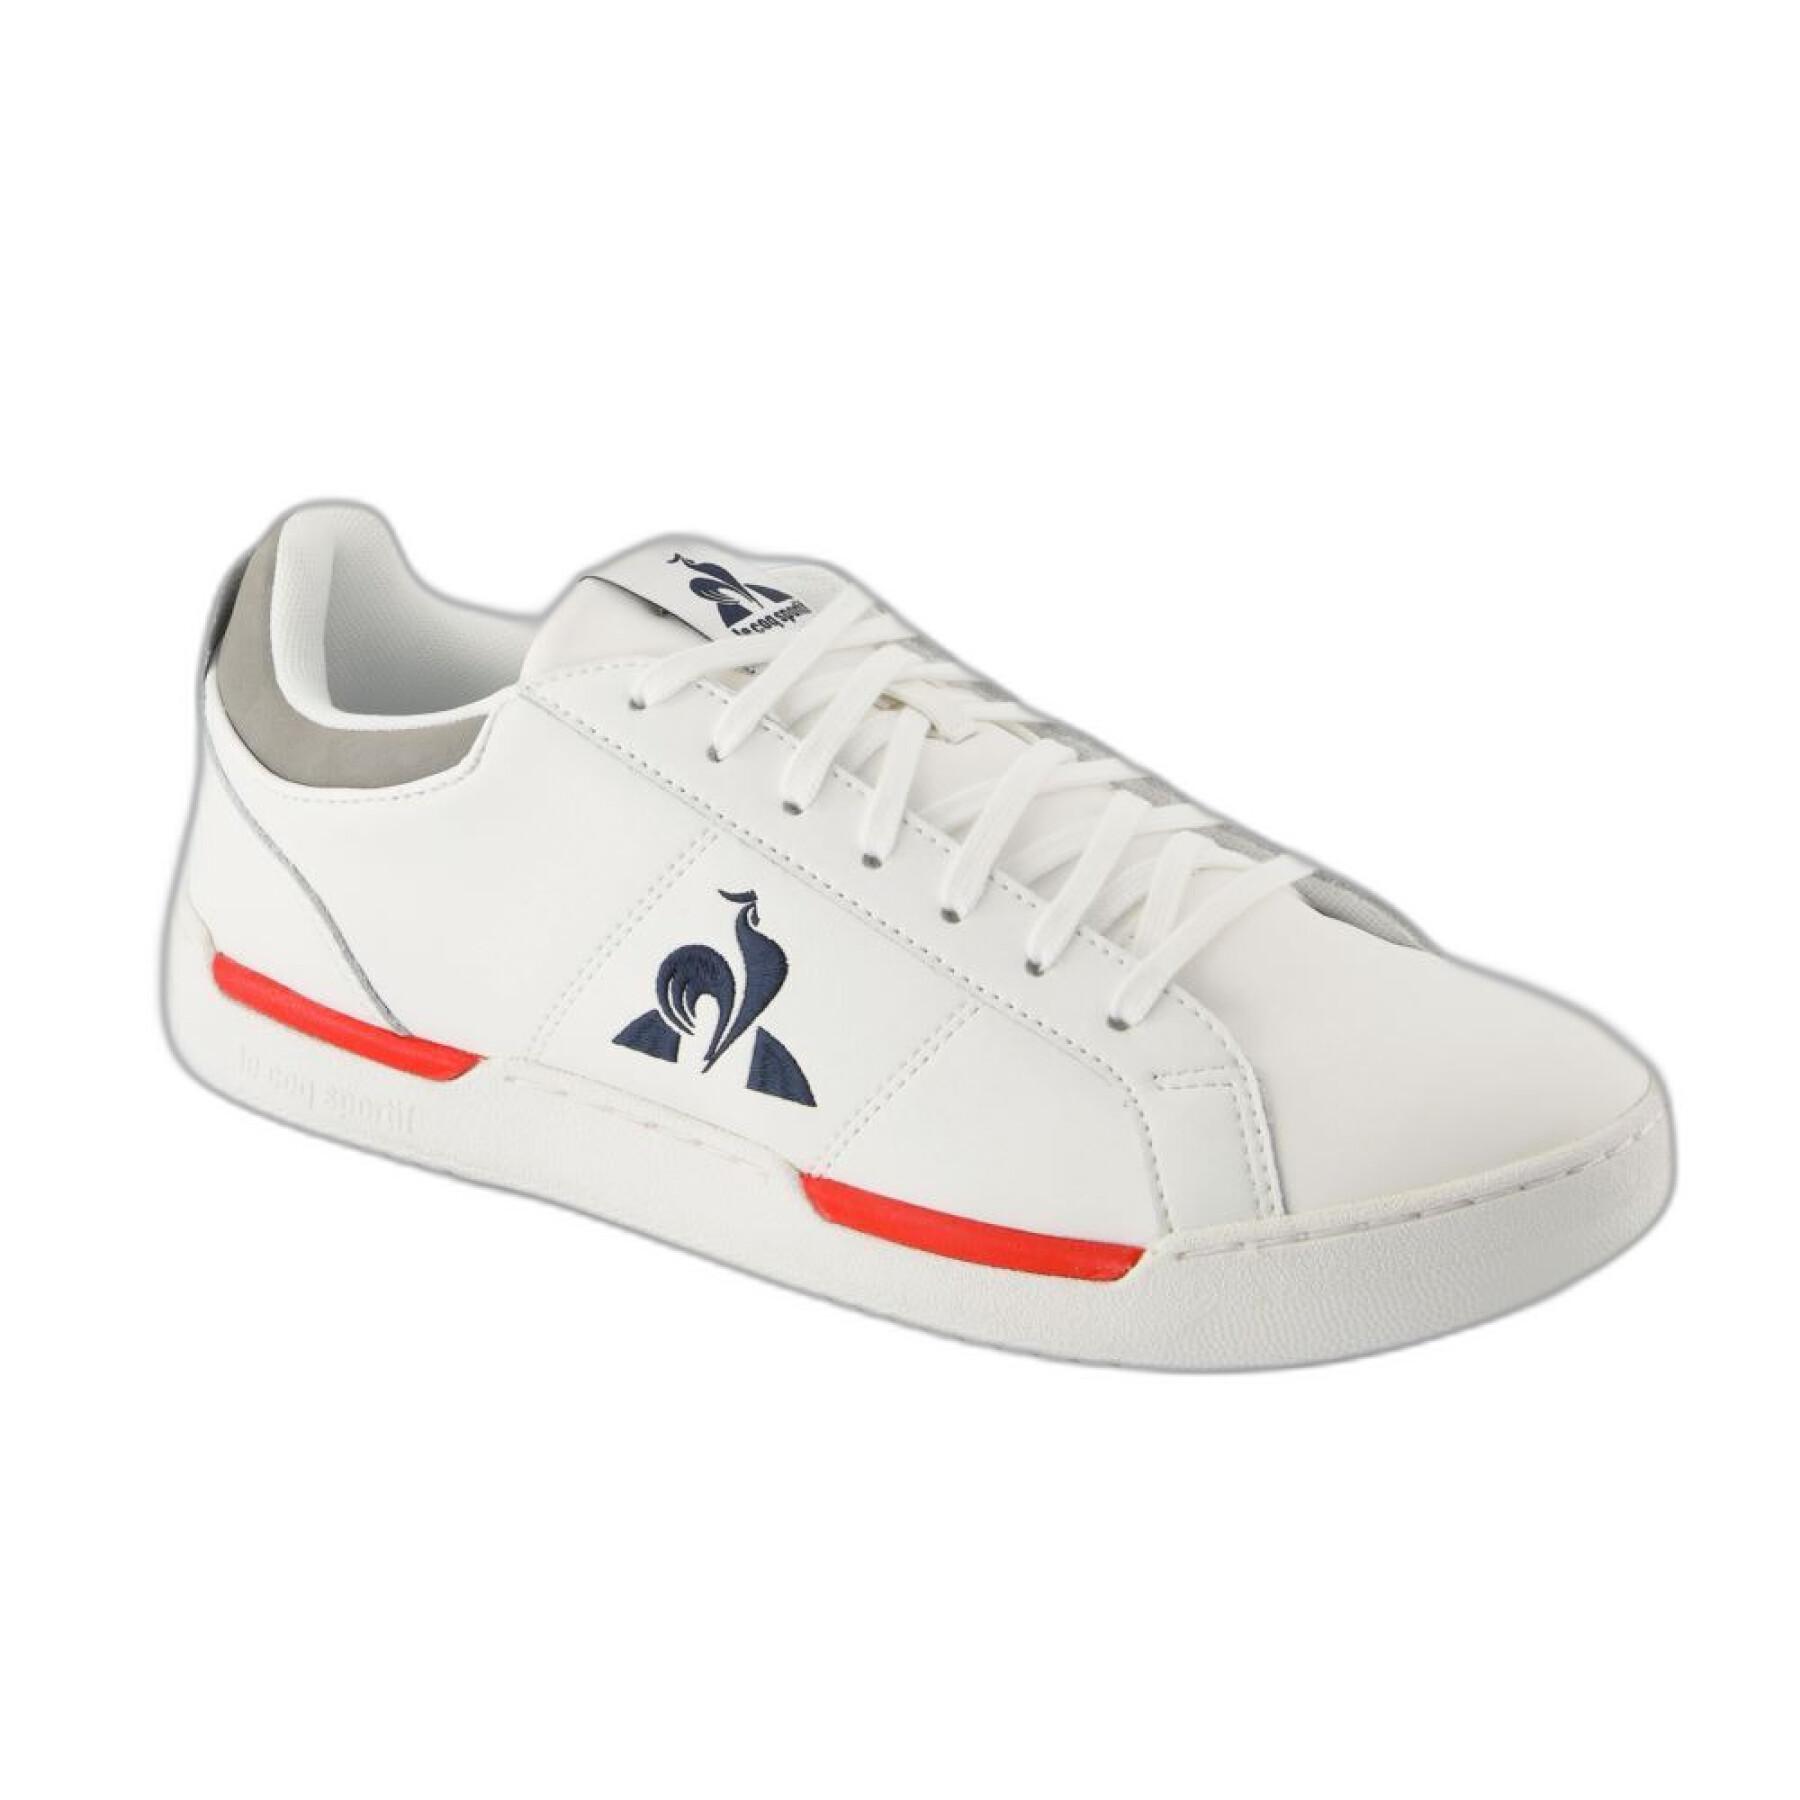 Pitfalls dog Vegetables Sneakers Le Coq Sportif Stadium Tricolore - Le Coq Sportif - Men's Sneakers  - Lifestyle